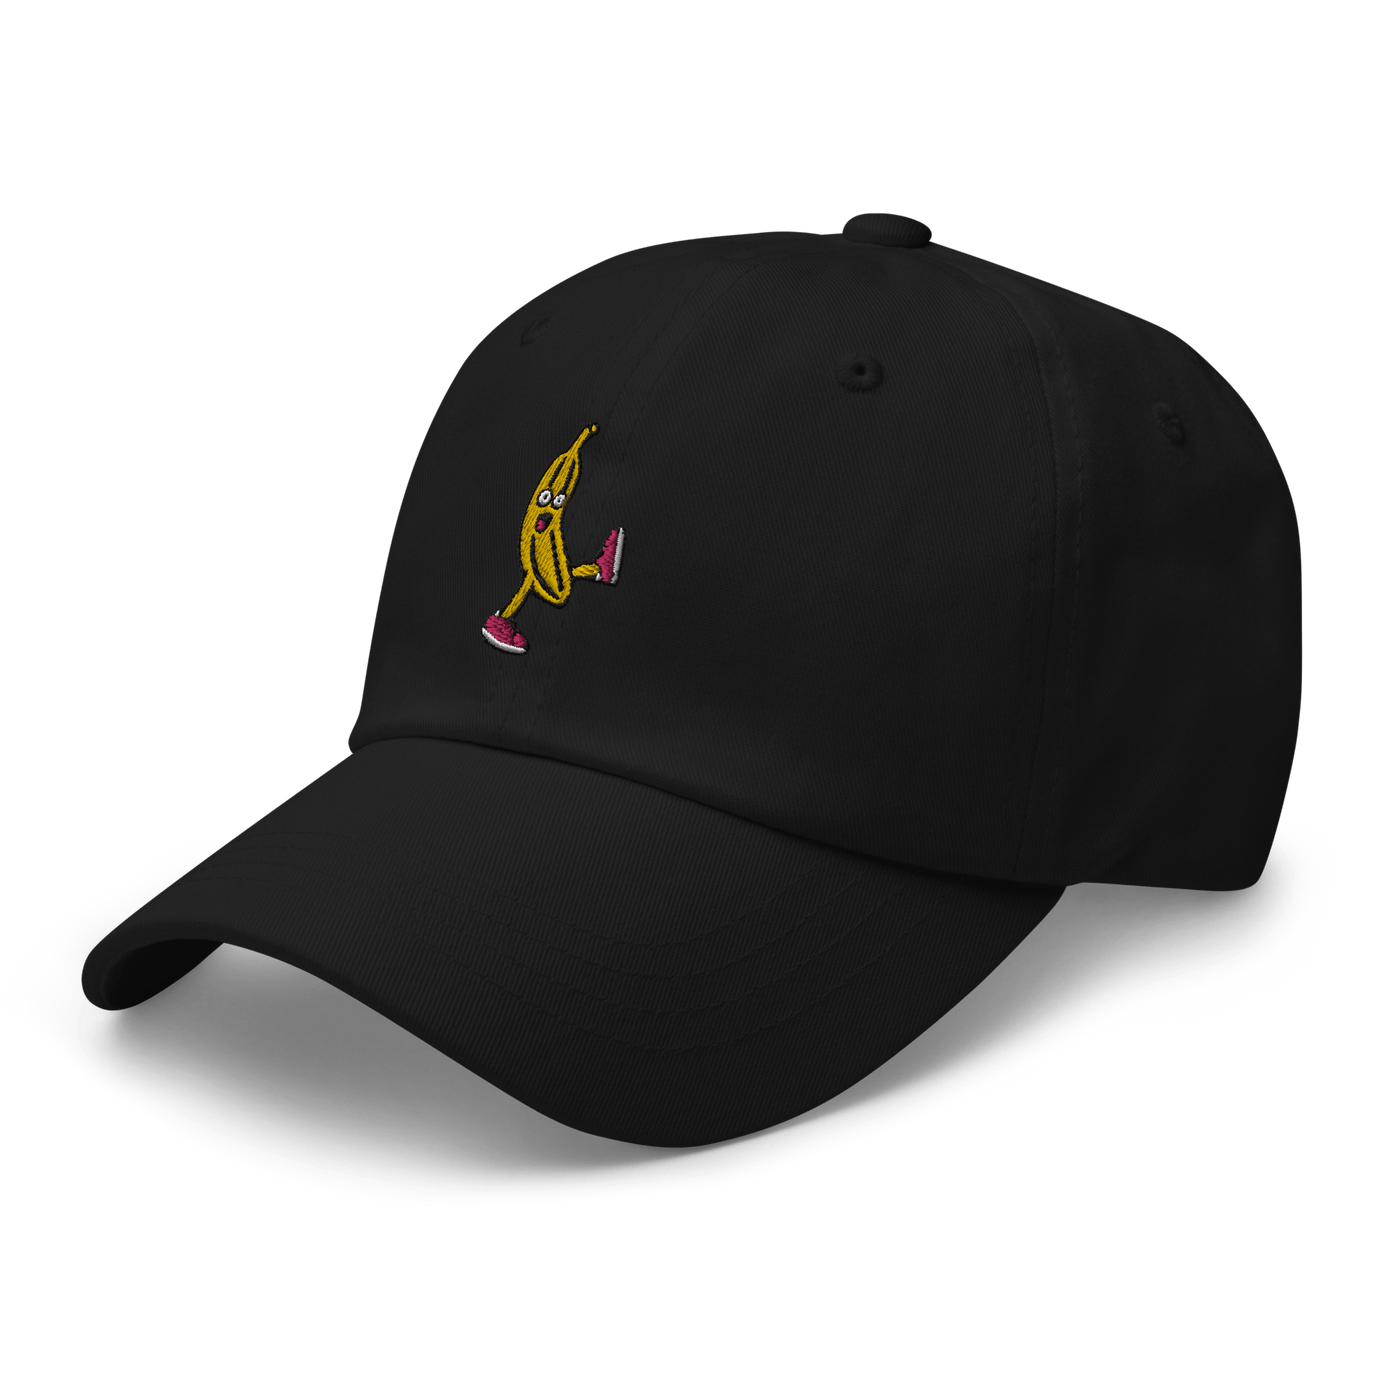 Drunk Banana Dad hat - Black - - Just Another Cap Store